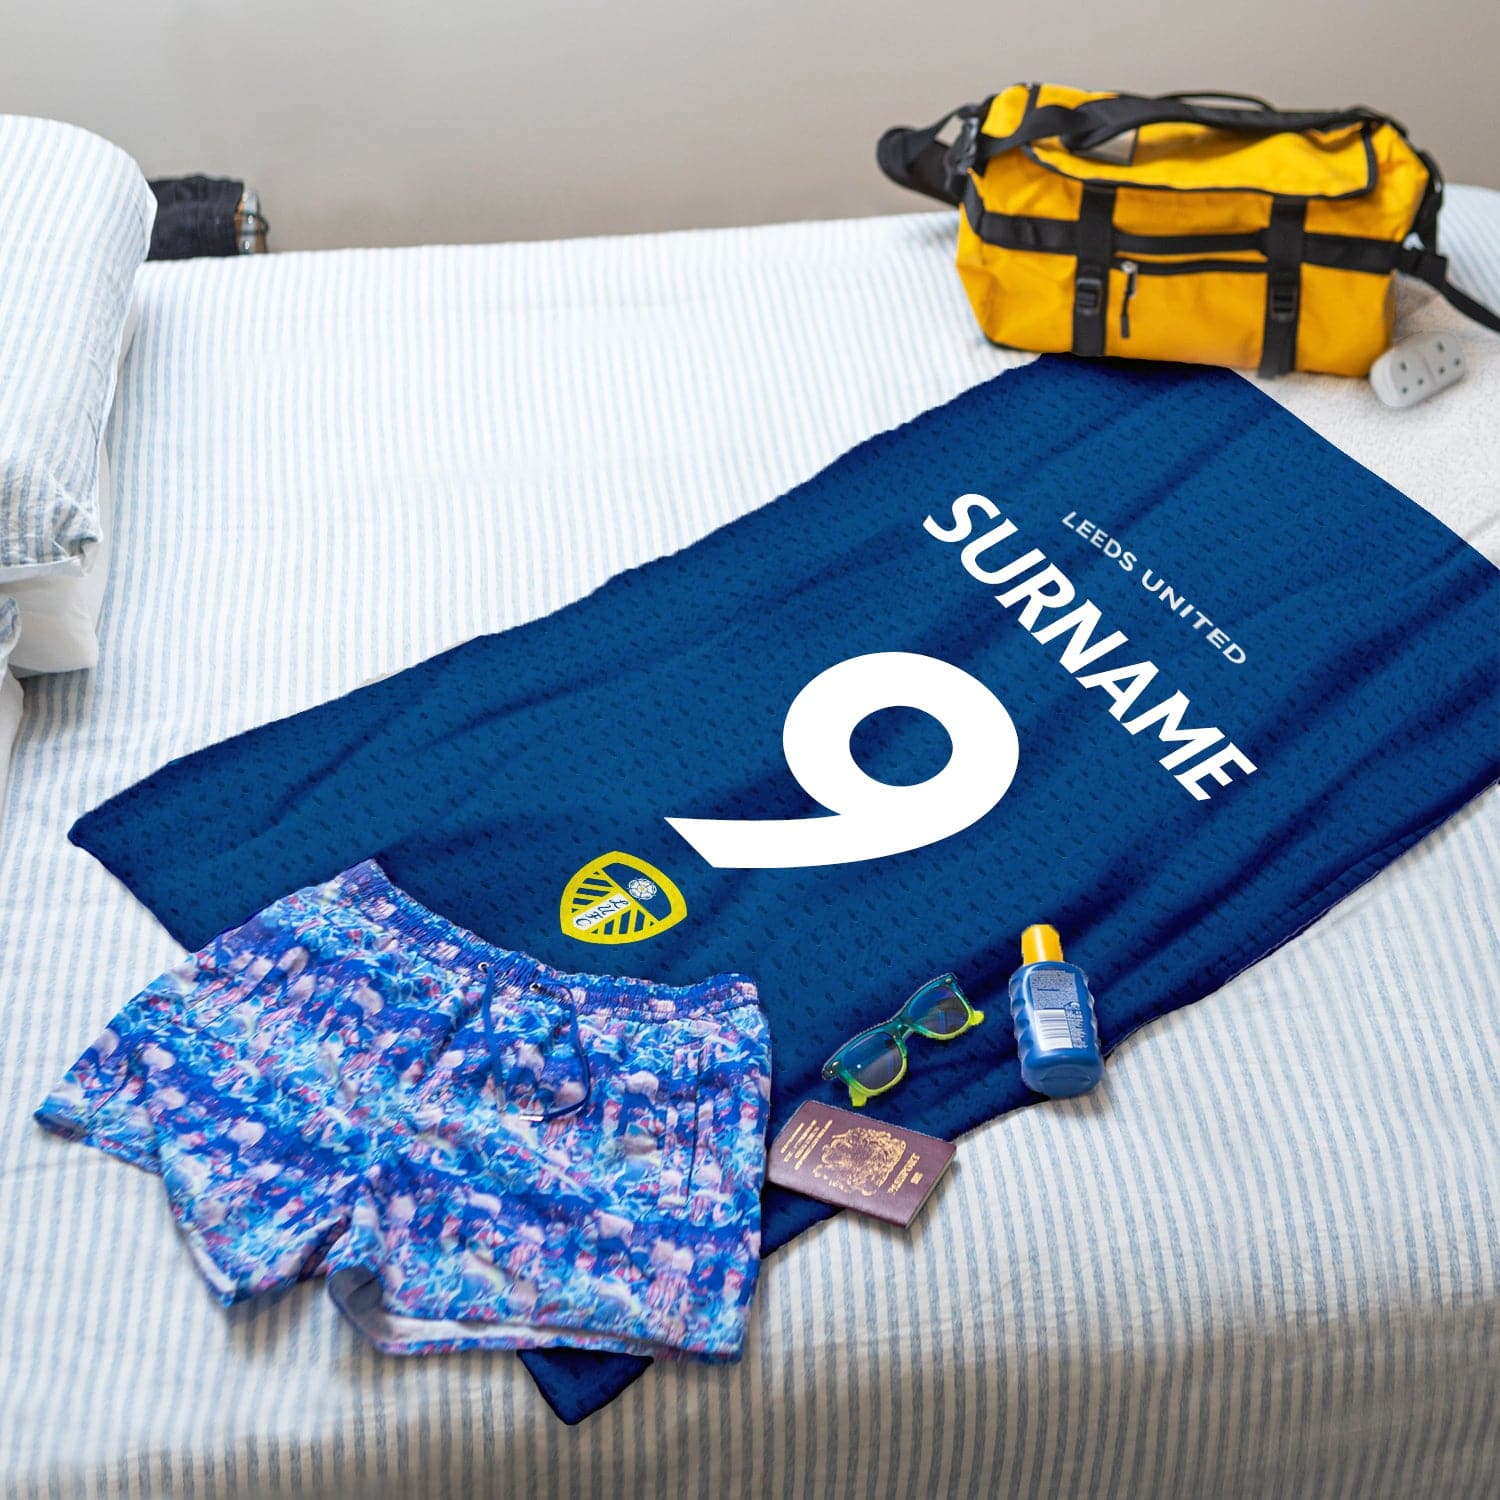 Leeds United FC Name Number - Personalised Beach Towel - 150cm x 75cm - Officially Licenced